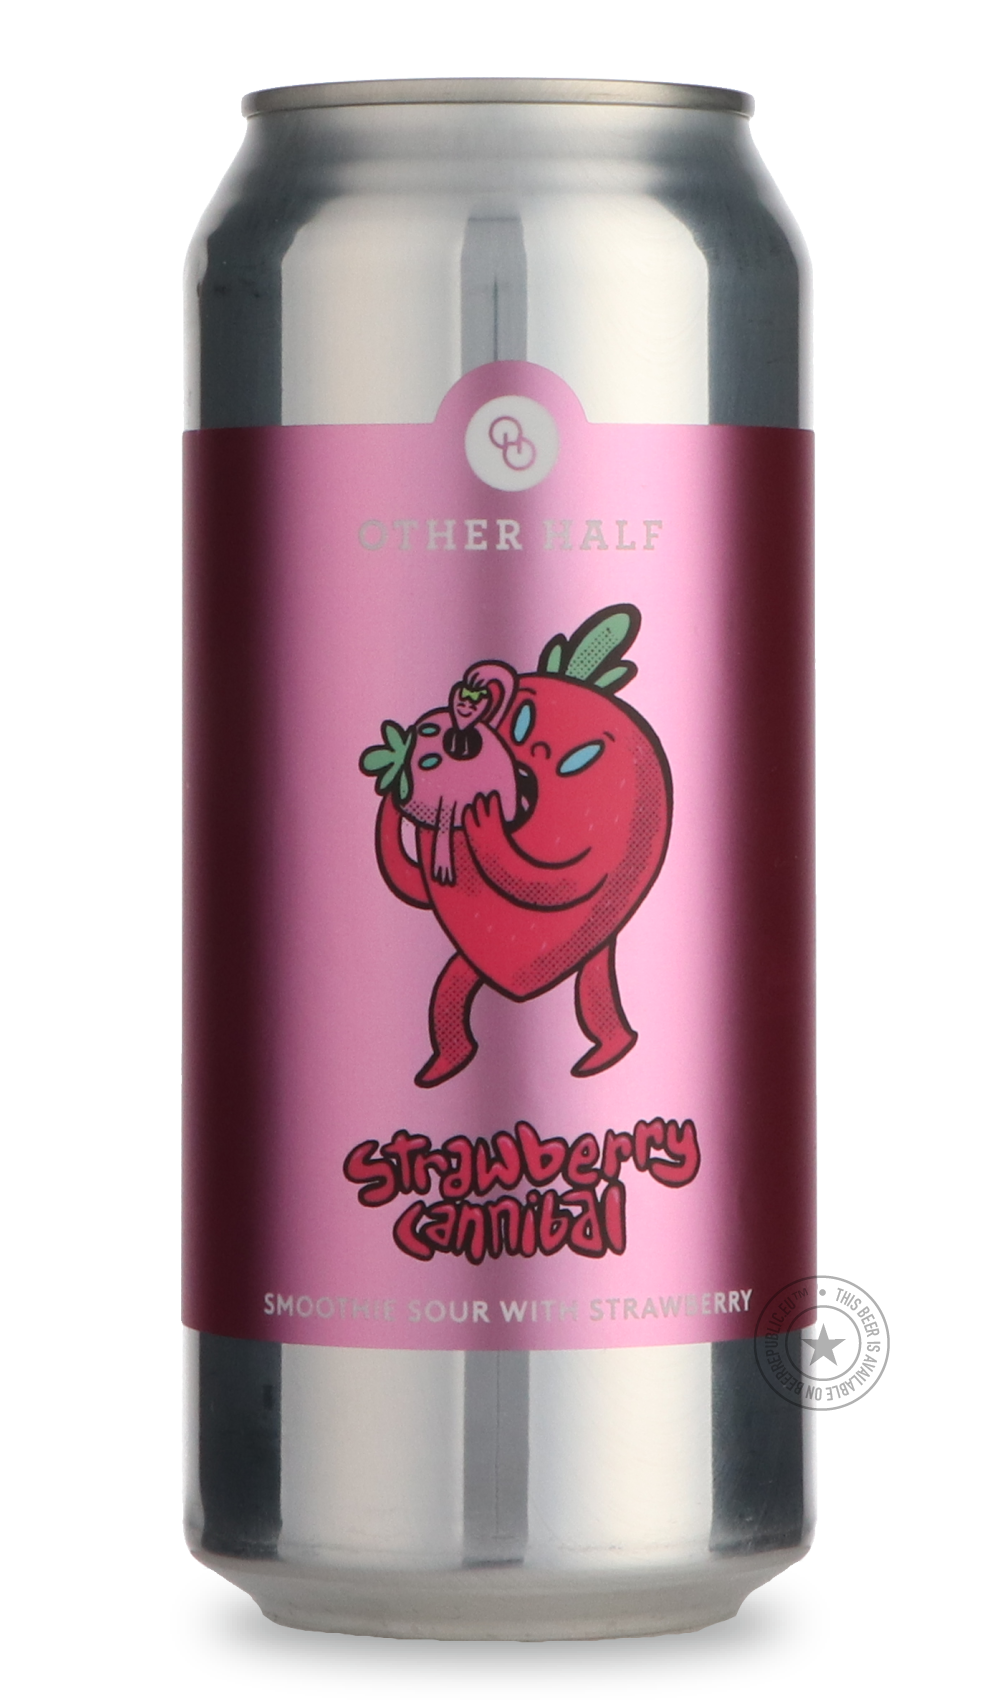 -Other Half- Strawberry Cannibal-Sour / Wild & Fruity- Only @ Beer Republic - The best online beer store for American & Canadian craft beer - Buy beer online from the USA and Canada - Bier online kopen - Amerikaans bier kopen - Craft beer store - Craft beer kopen - Amerikanisch bier kaufen - Bier online kaufen - Acheter biere online - IPA - Stout - Porter - New England IPA - Hazy IPA - Imperial Stout - Barrel Aged - Barrel Aged Imperial Stout - Brown - Dark beer - Blond - Blonde - Pilsner - Lager - Wheat - 